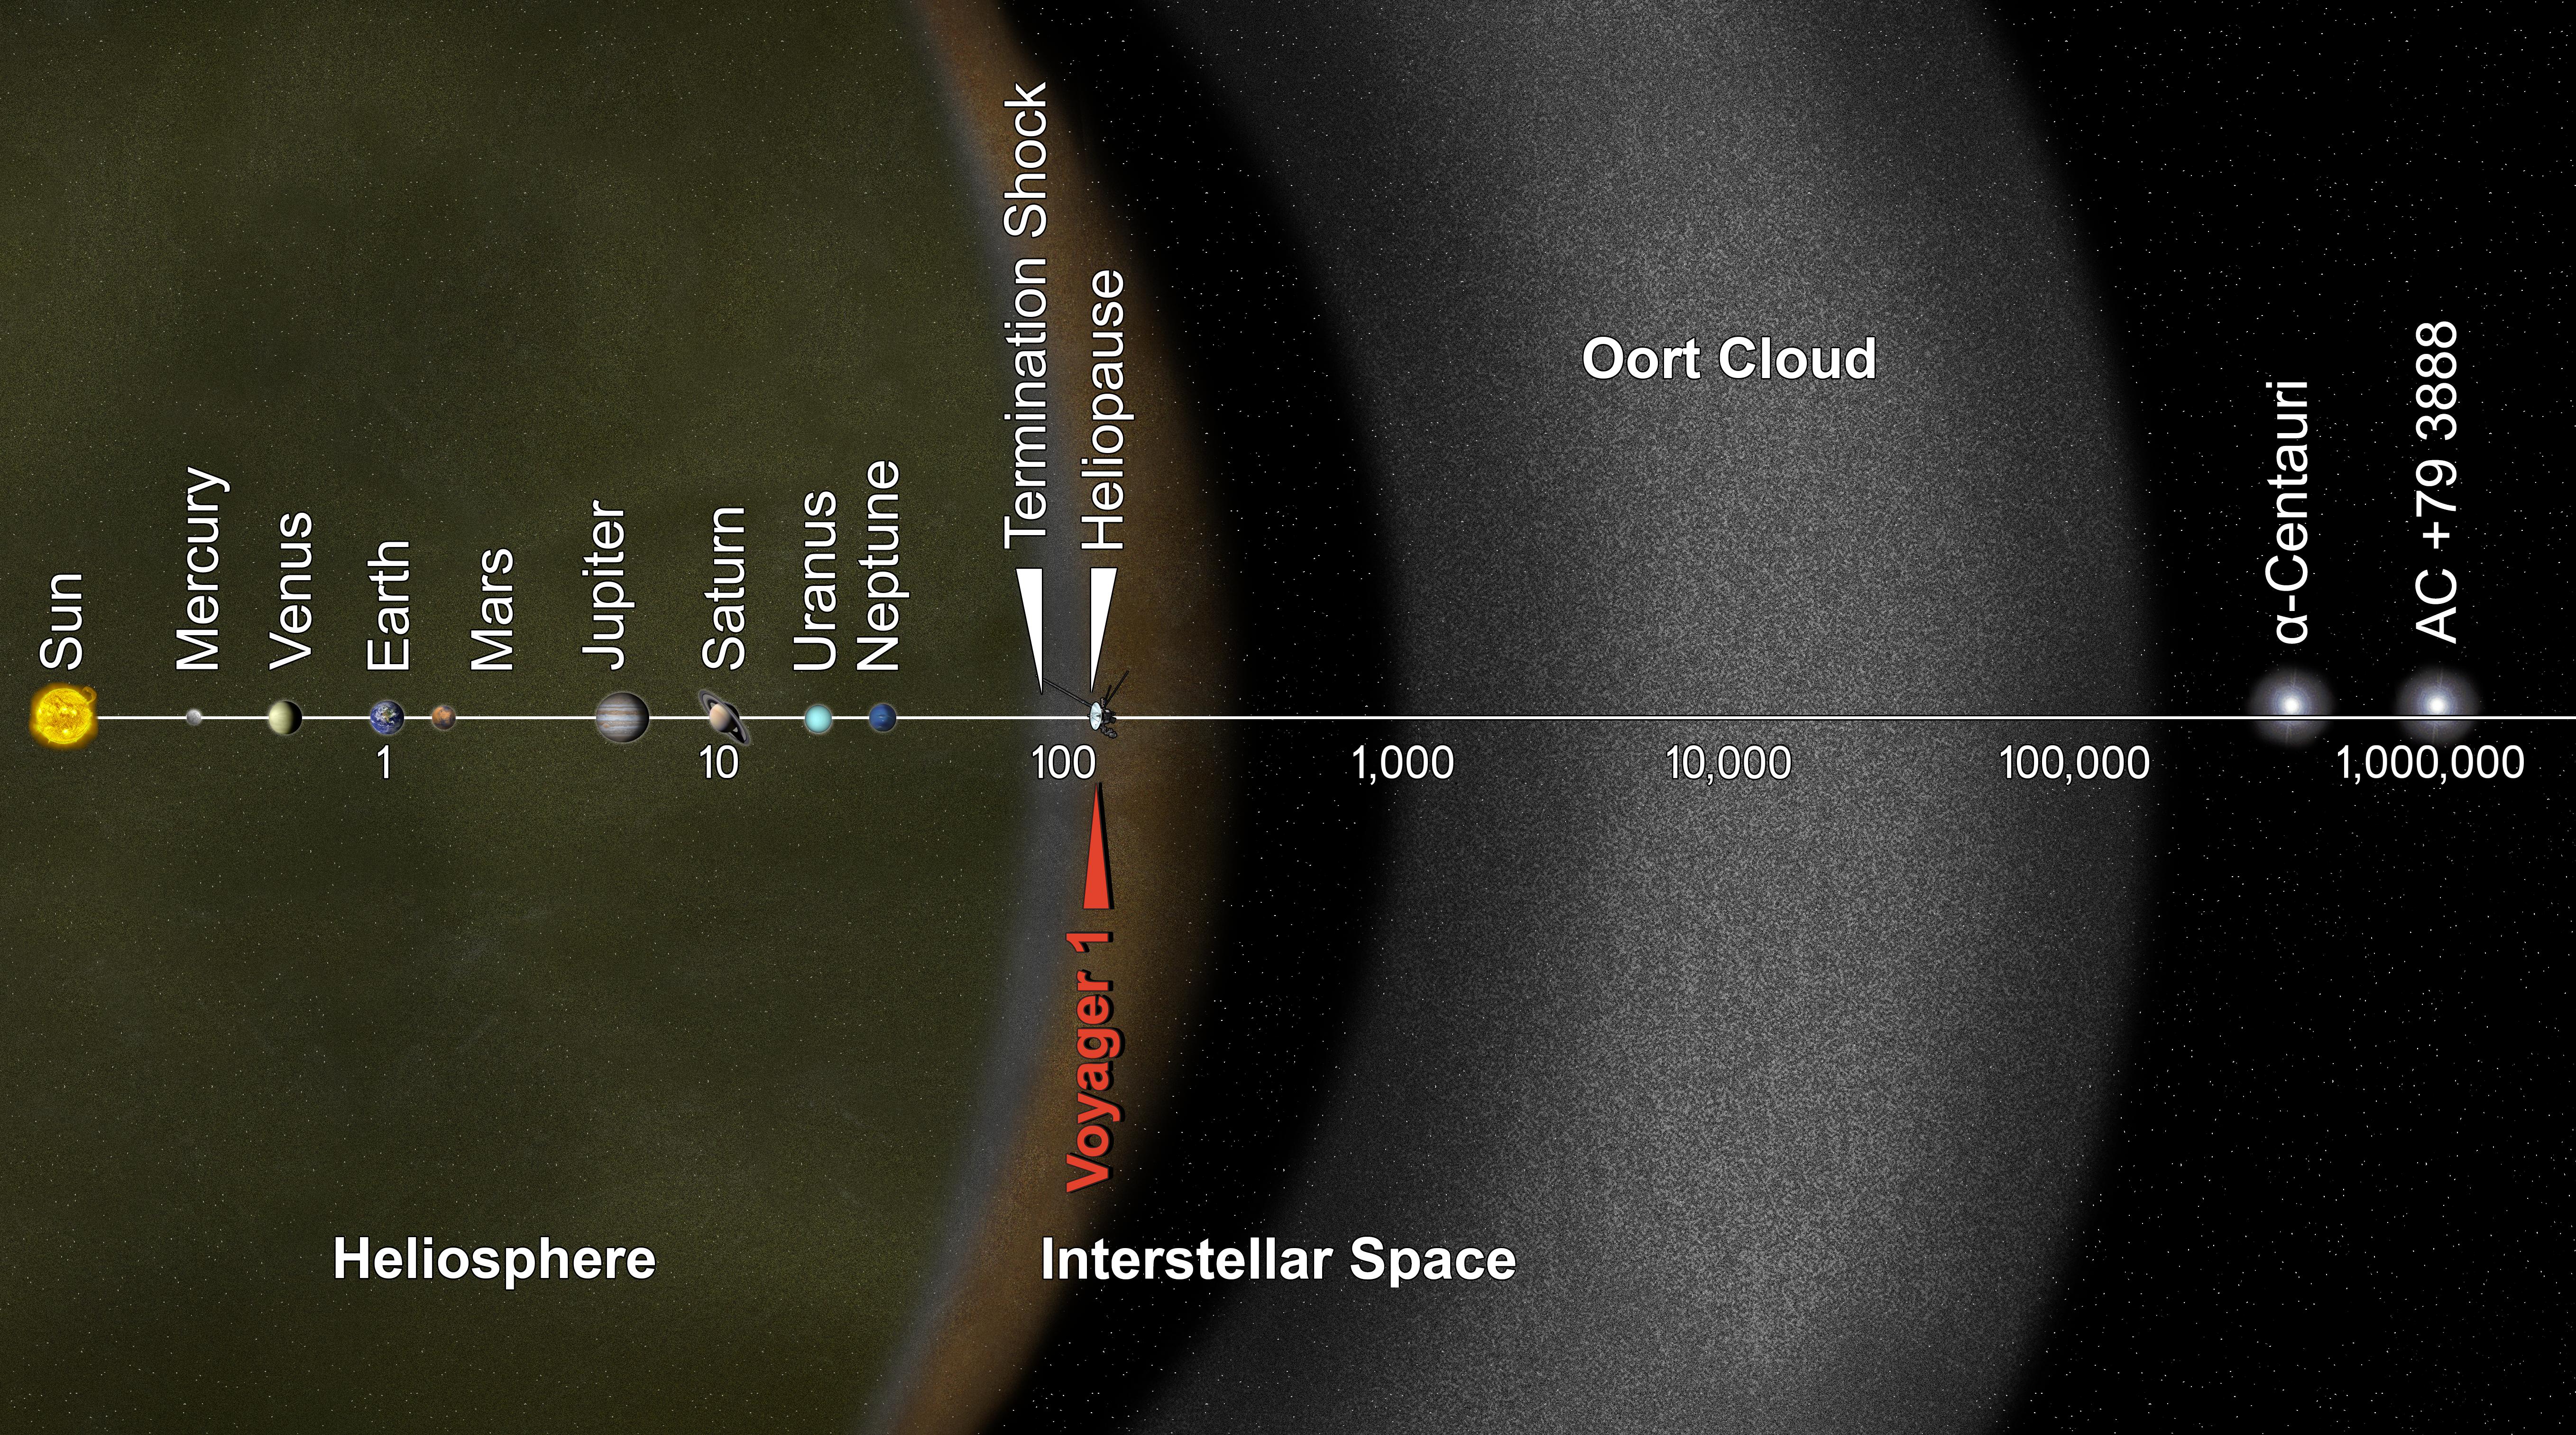 Diagram of the solar system, starting with the Sun on the left, Pluto in the middle, and the Oort Cloud as a large, outermost ring on the right side of the diagram.